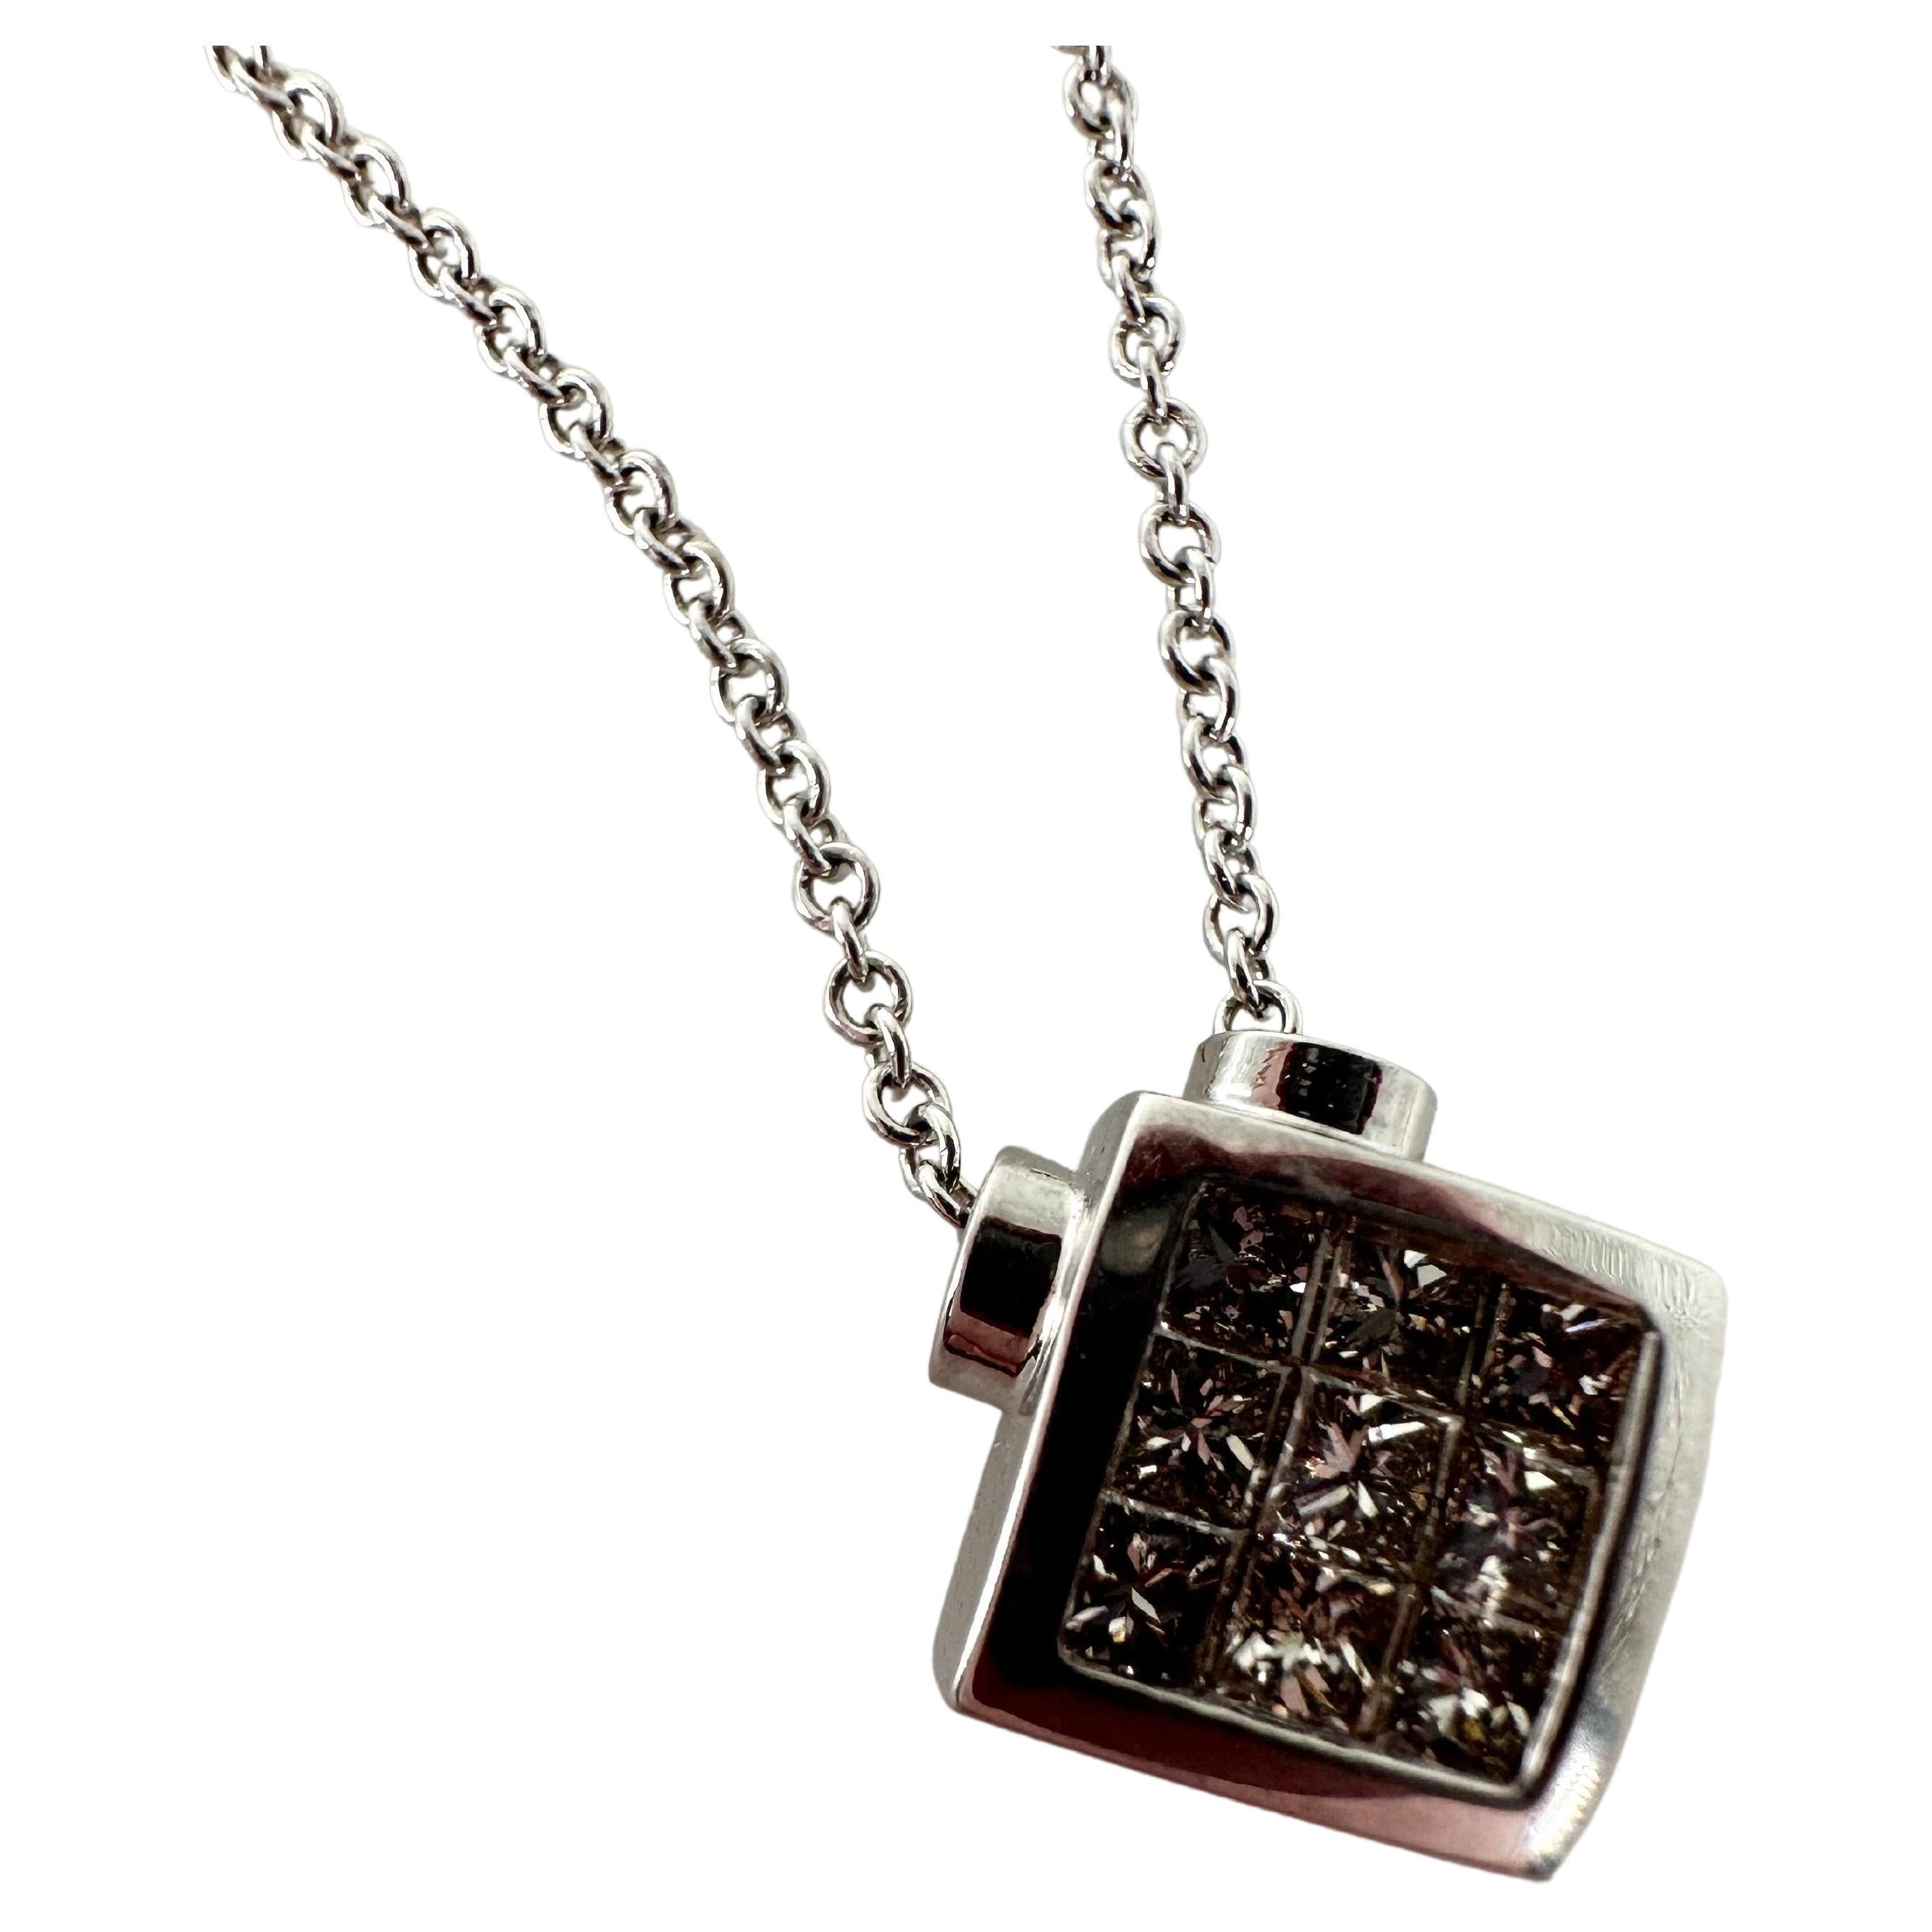 Wonderfully made invisible setting style pendant necklace in 18Kt white gold. The chain is 16